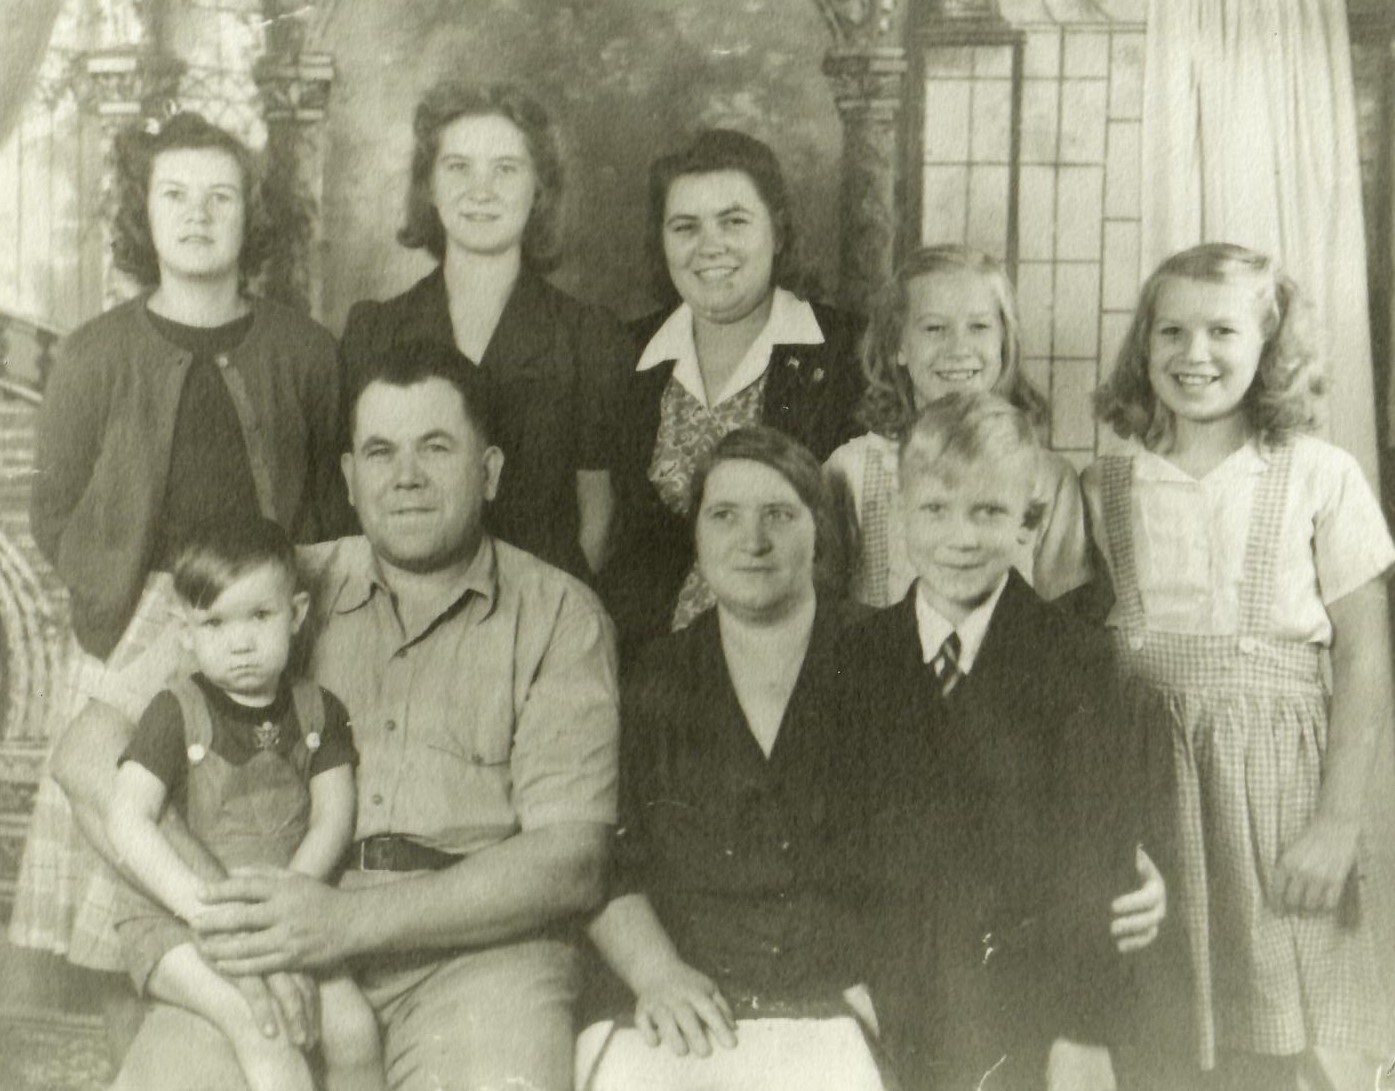 Linda Stout’s PawPaw (Grandfather), Grandmother, Mother, Aunts, and Uncles